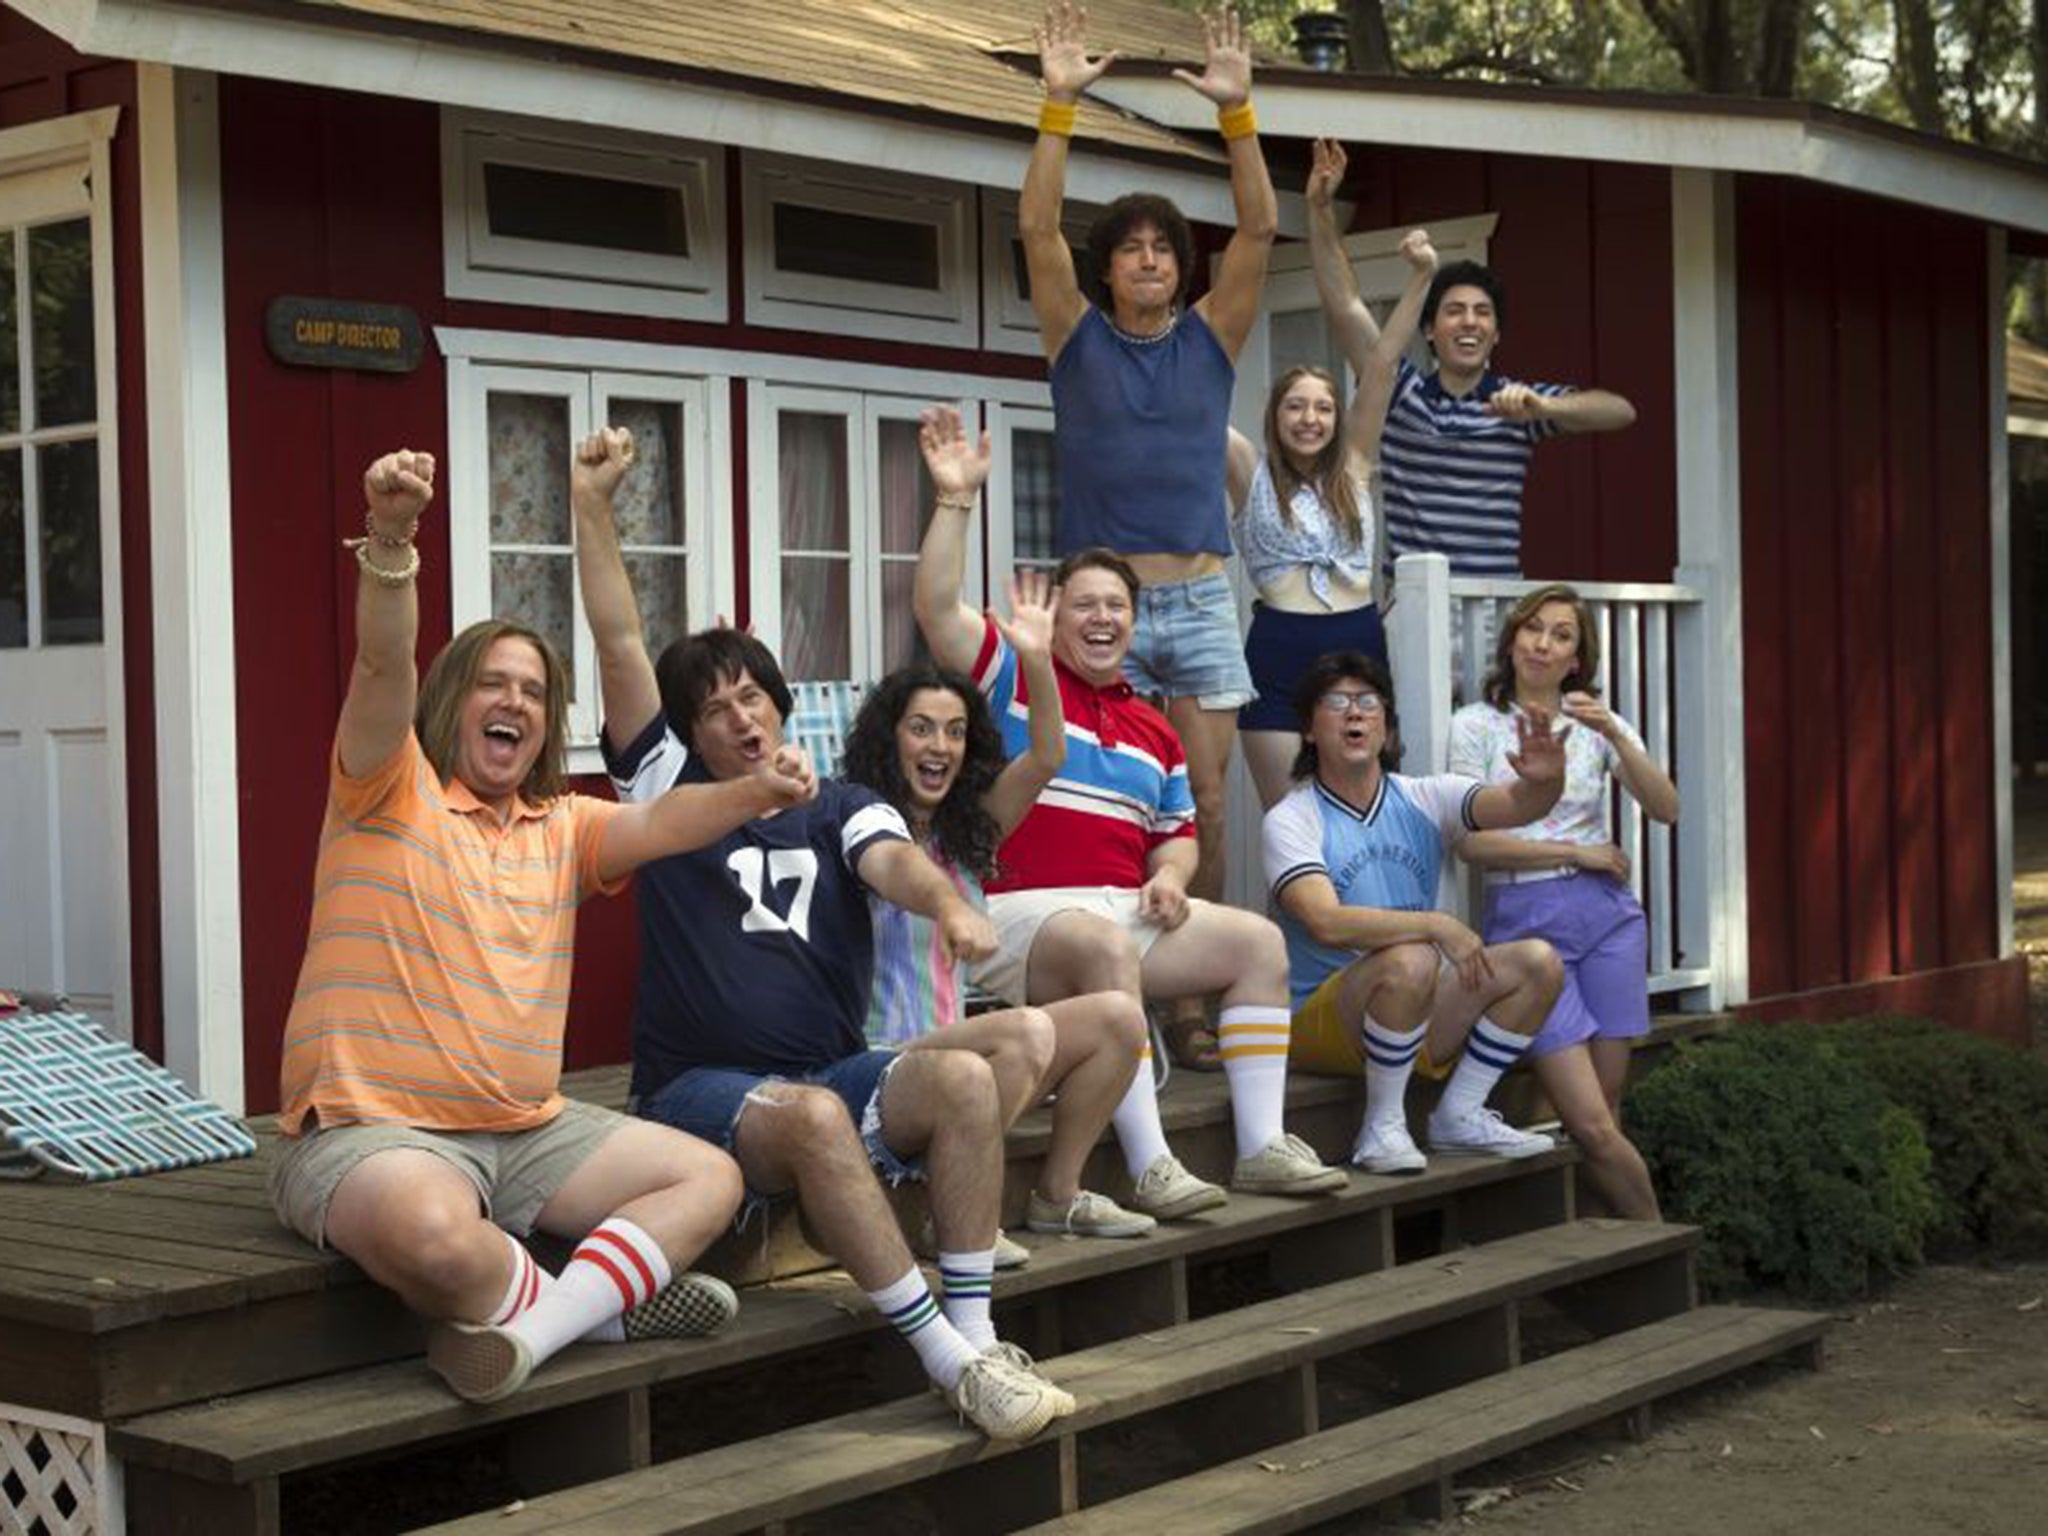 Wet Hot Summer: First Day of Camp is the eight-episode prequel to Wet Hot American Summer, a 2001 parody of the Eighties coming-of-age movie, in which a cast of comedy unknowns necked, pranked and doobie-smoked their way through the last day of summer at